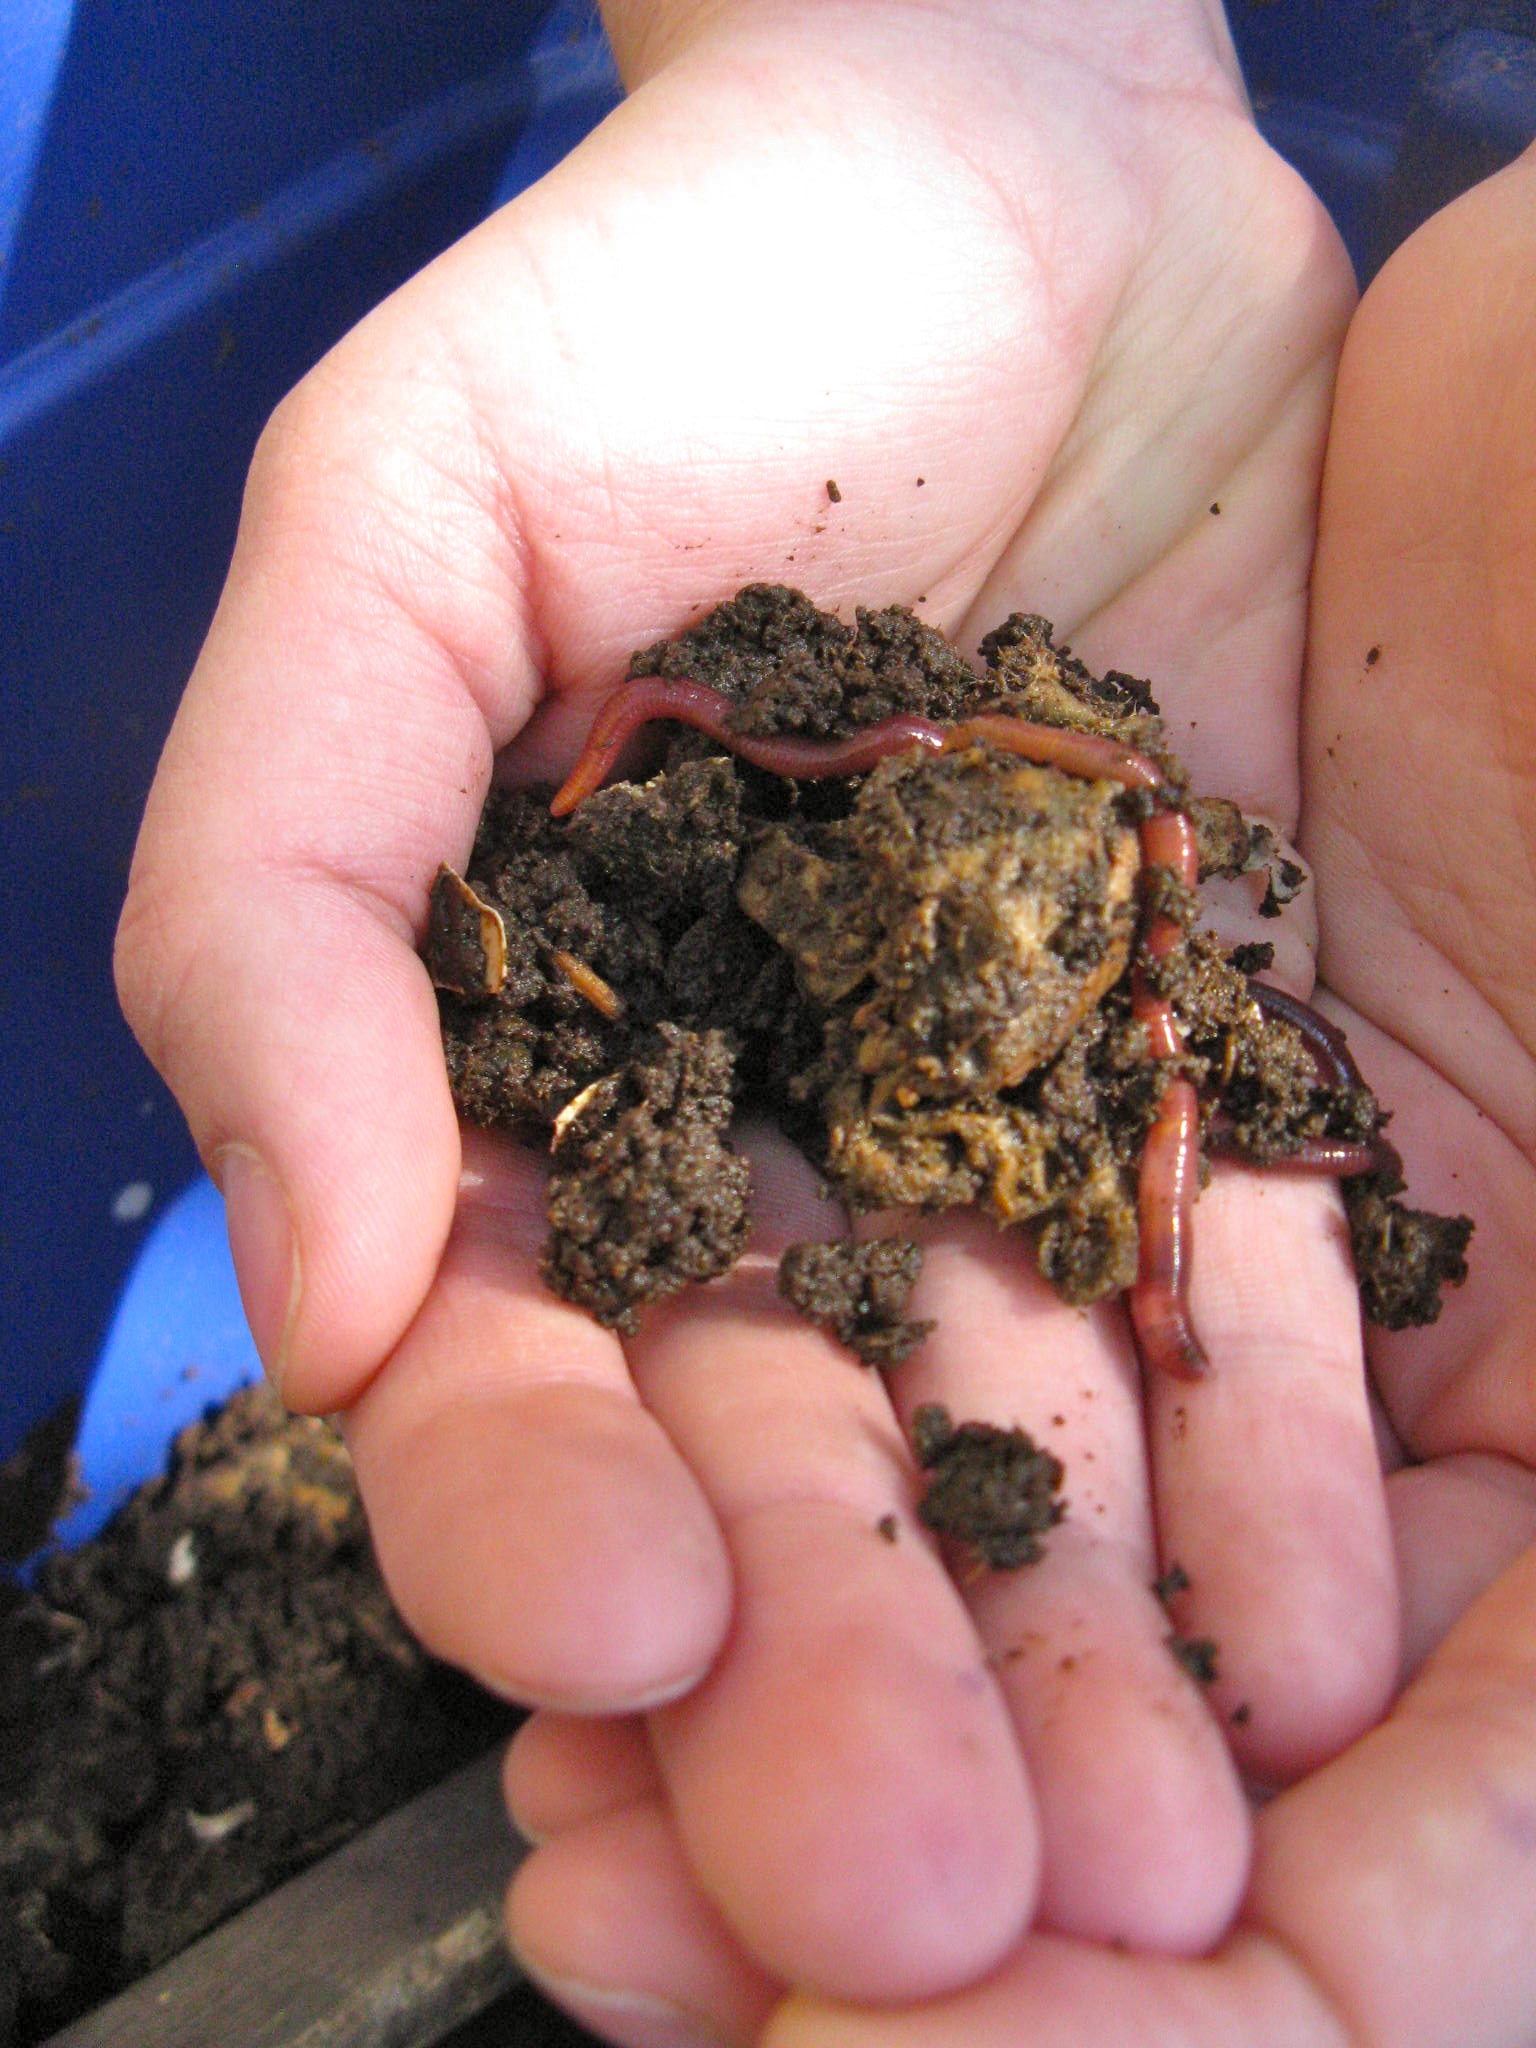 Hands holding worms and dirt in them